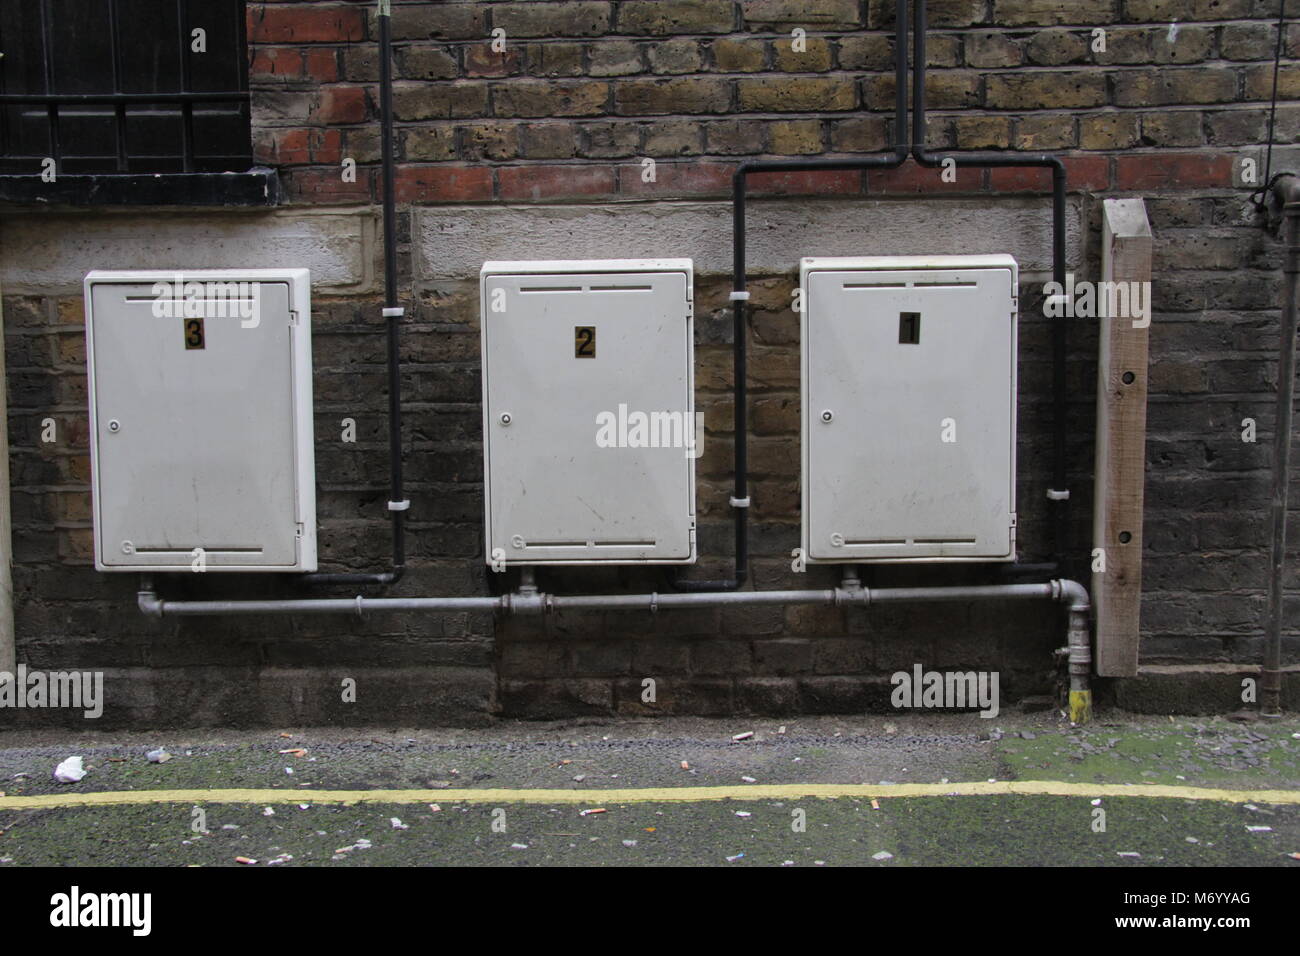 Electrical boxes against brickwall Stock Photo